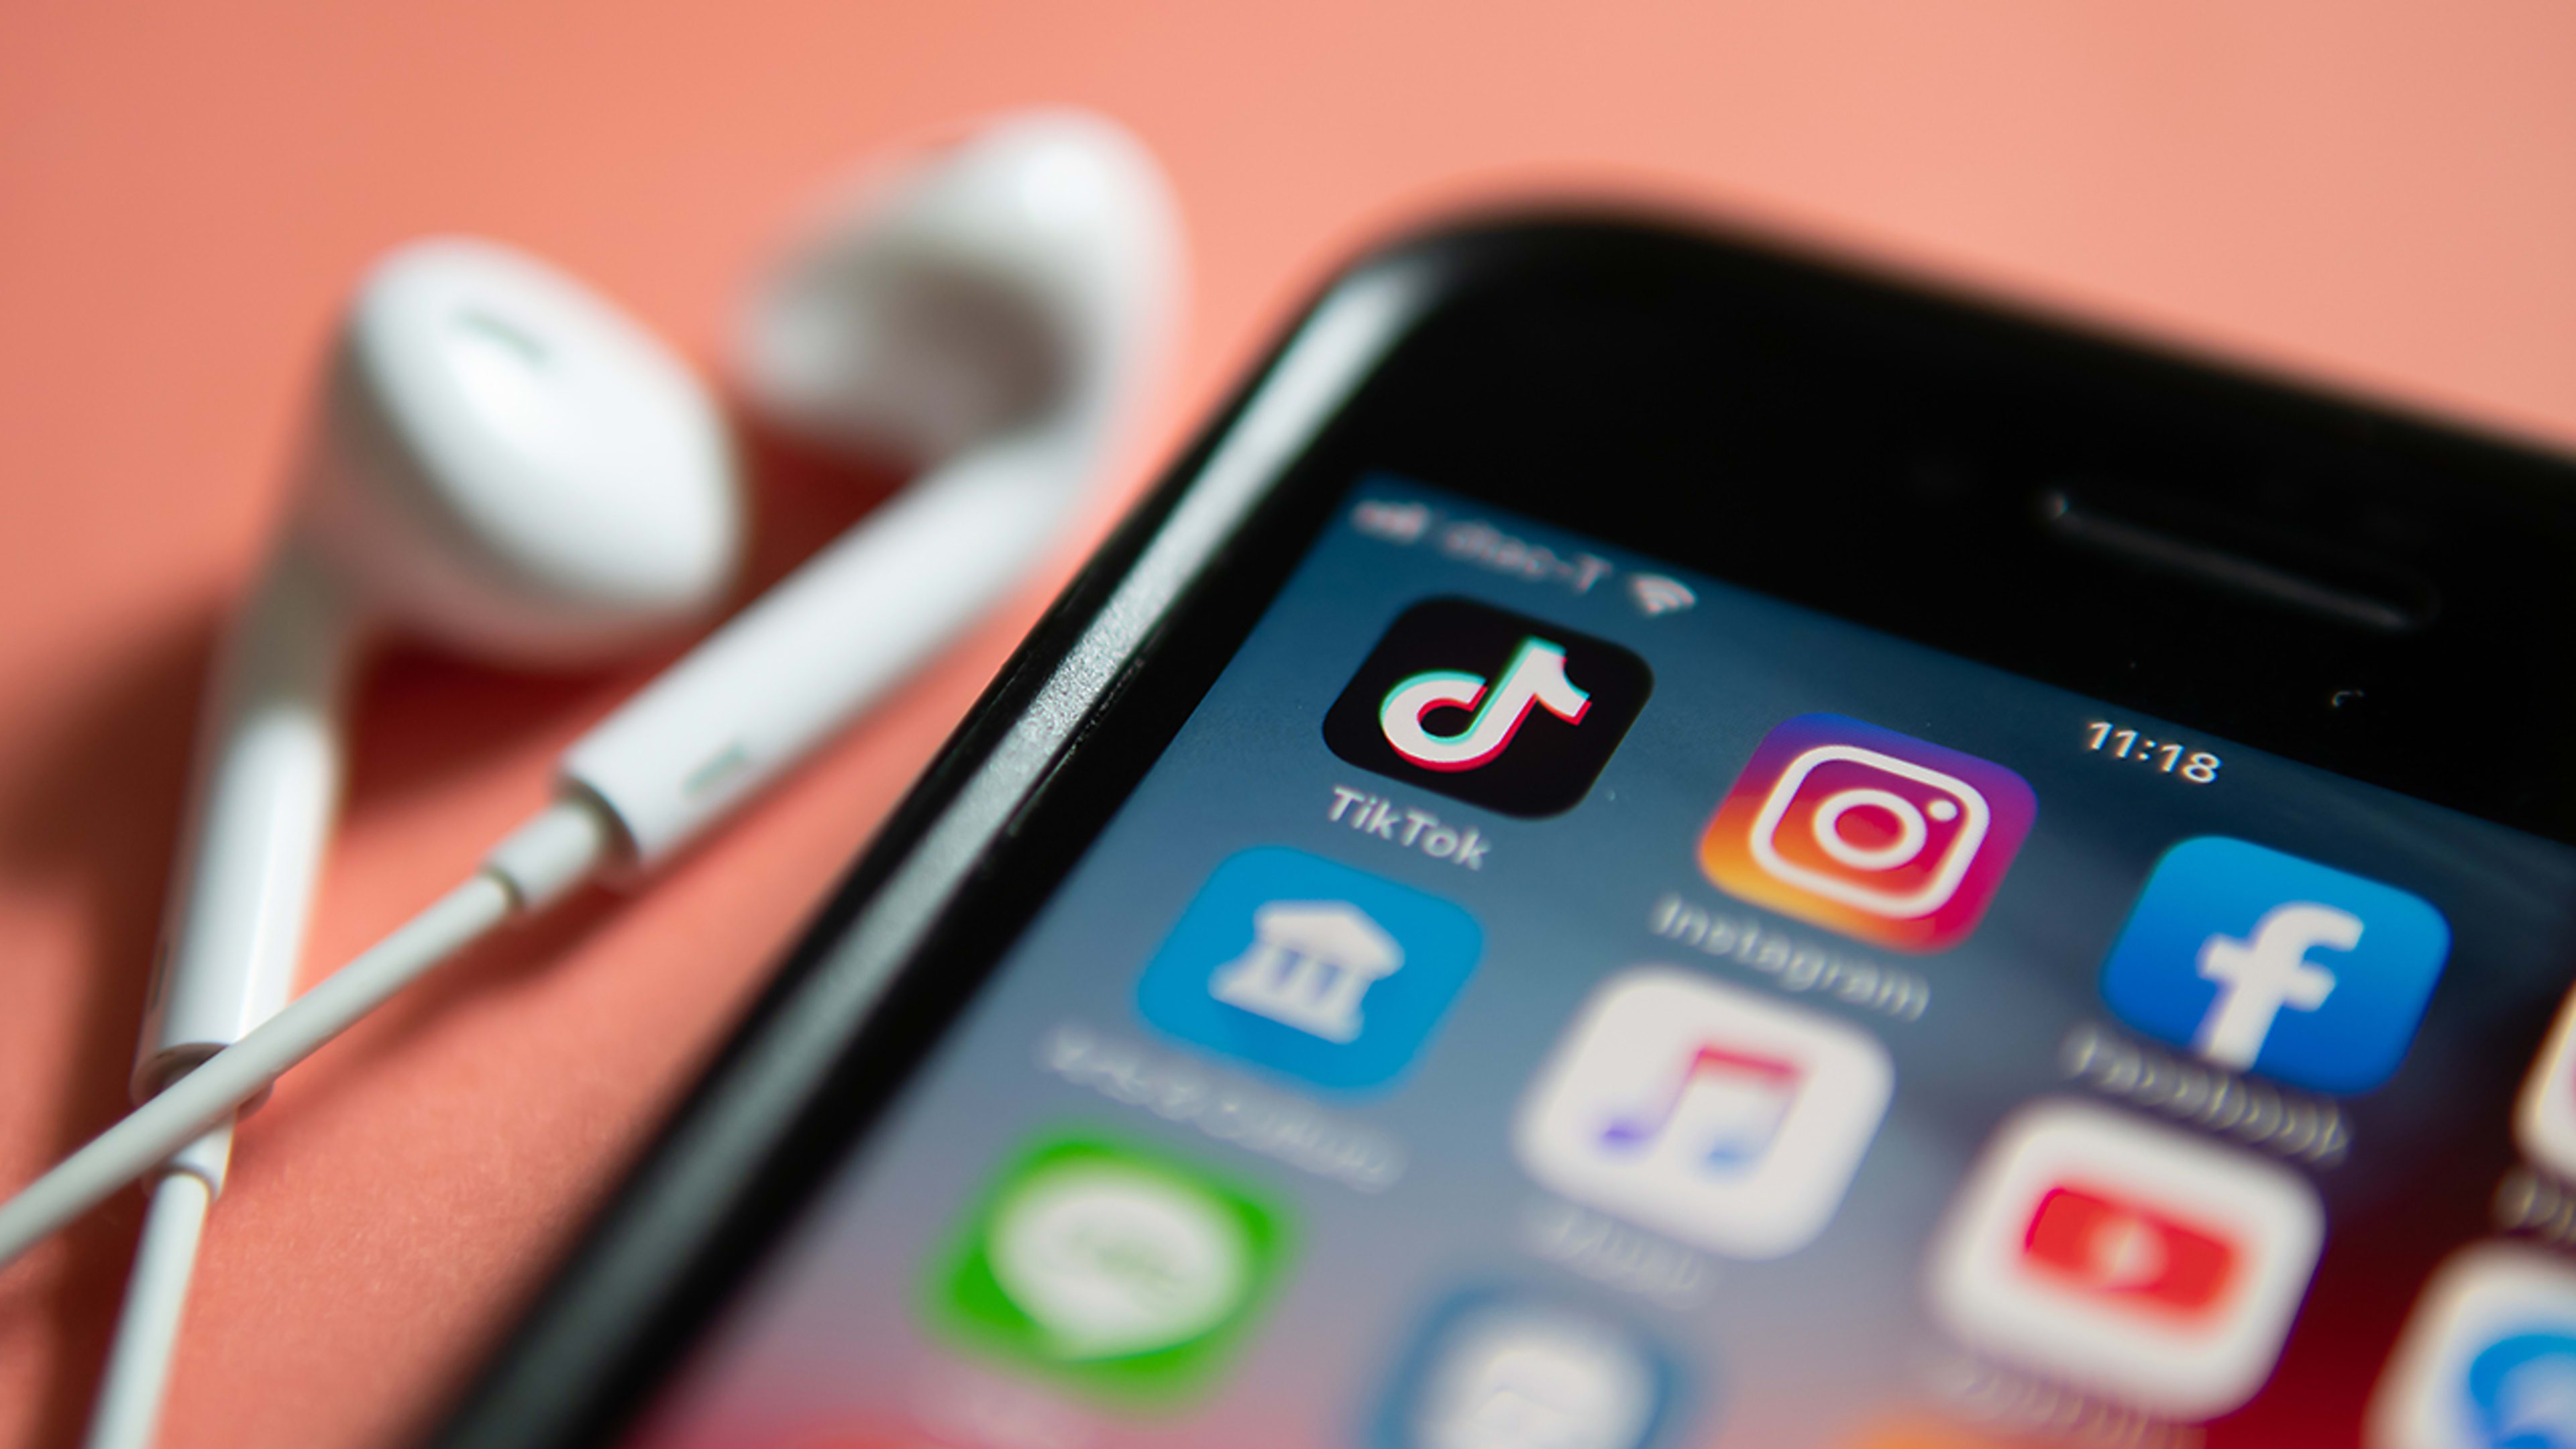 China-based TikTok and other apps are banned in India following border conflict